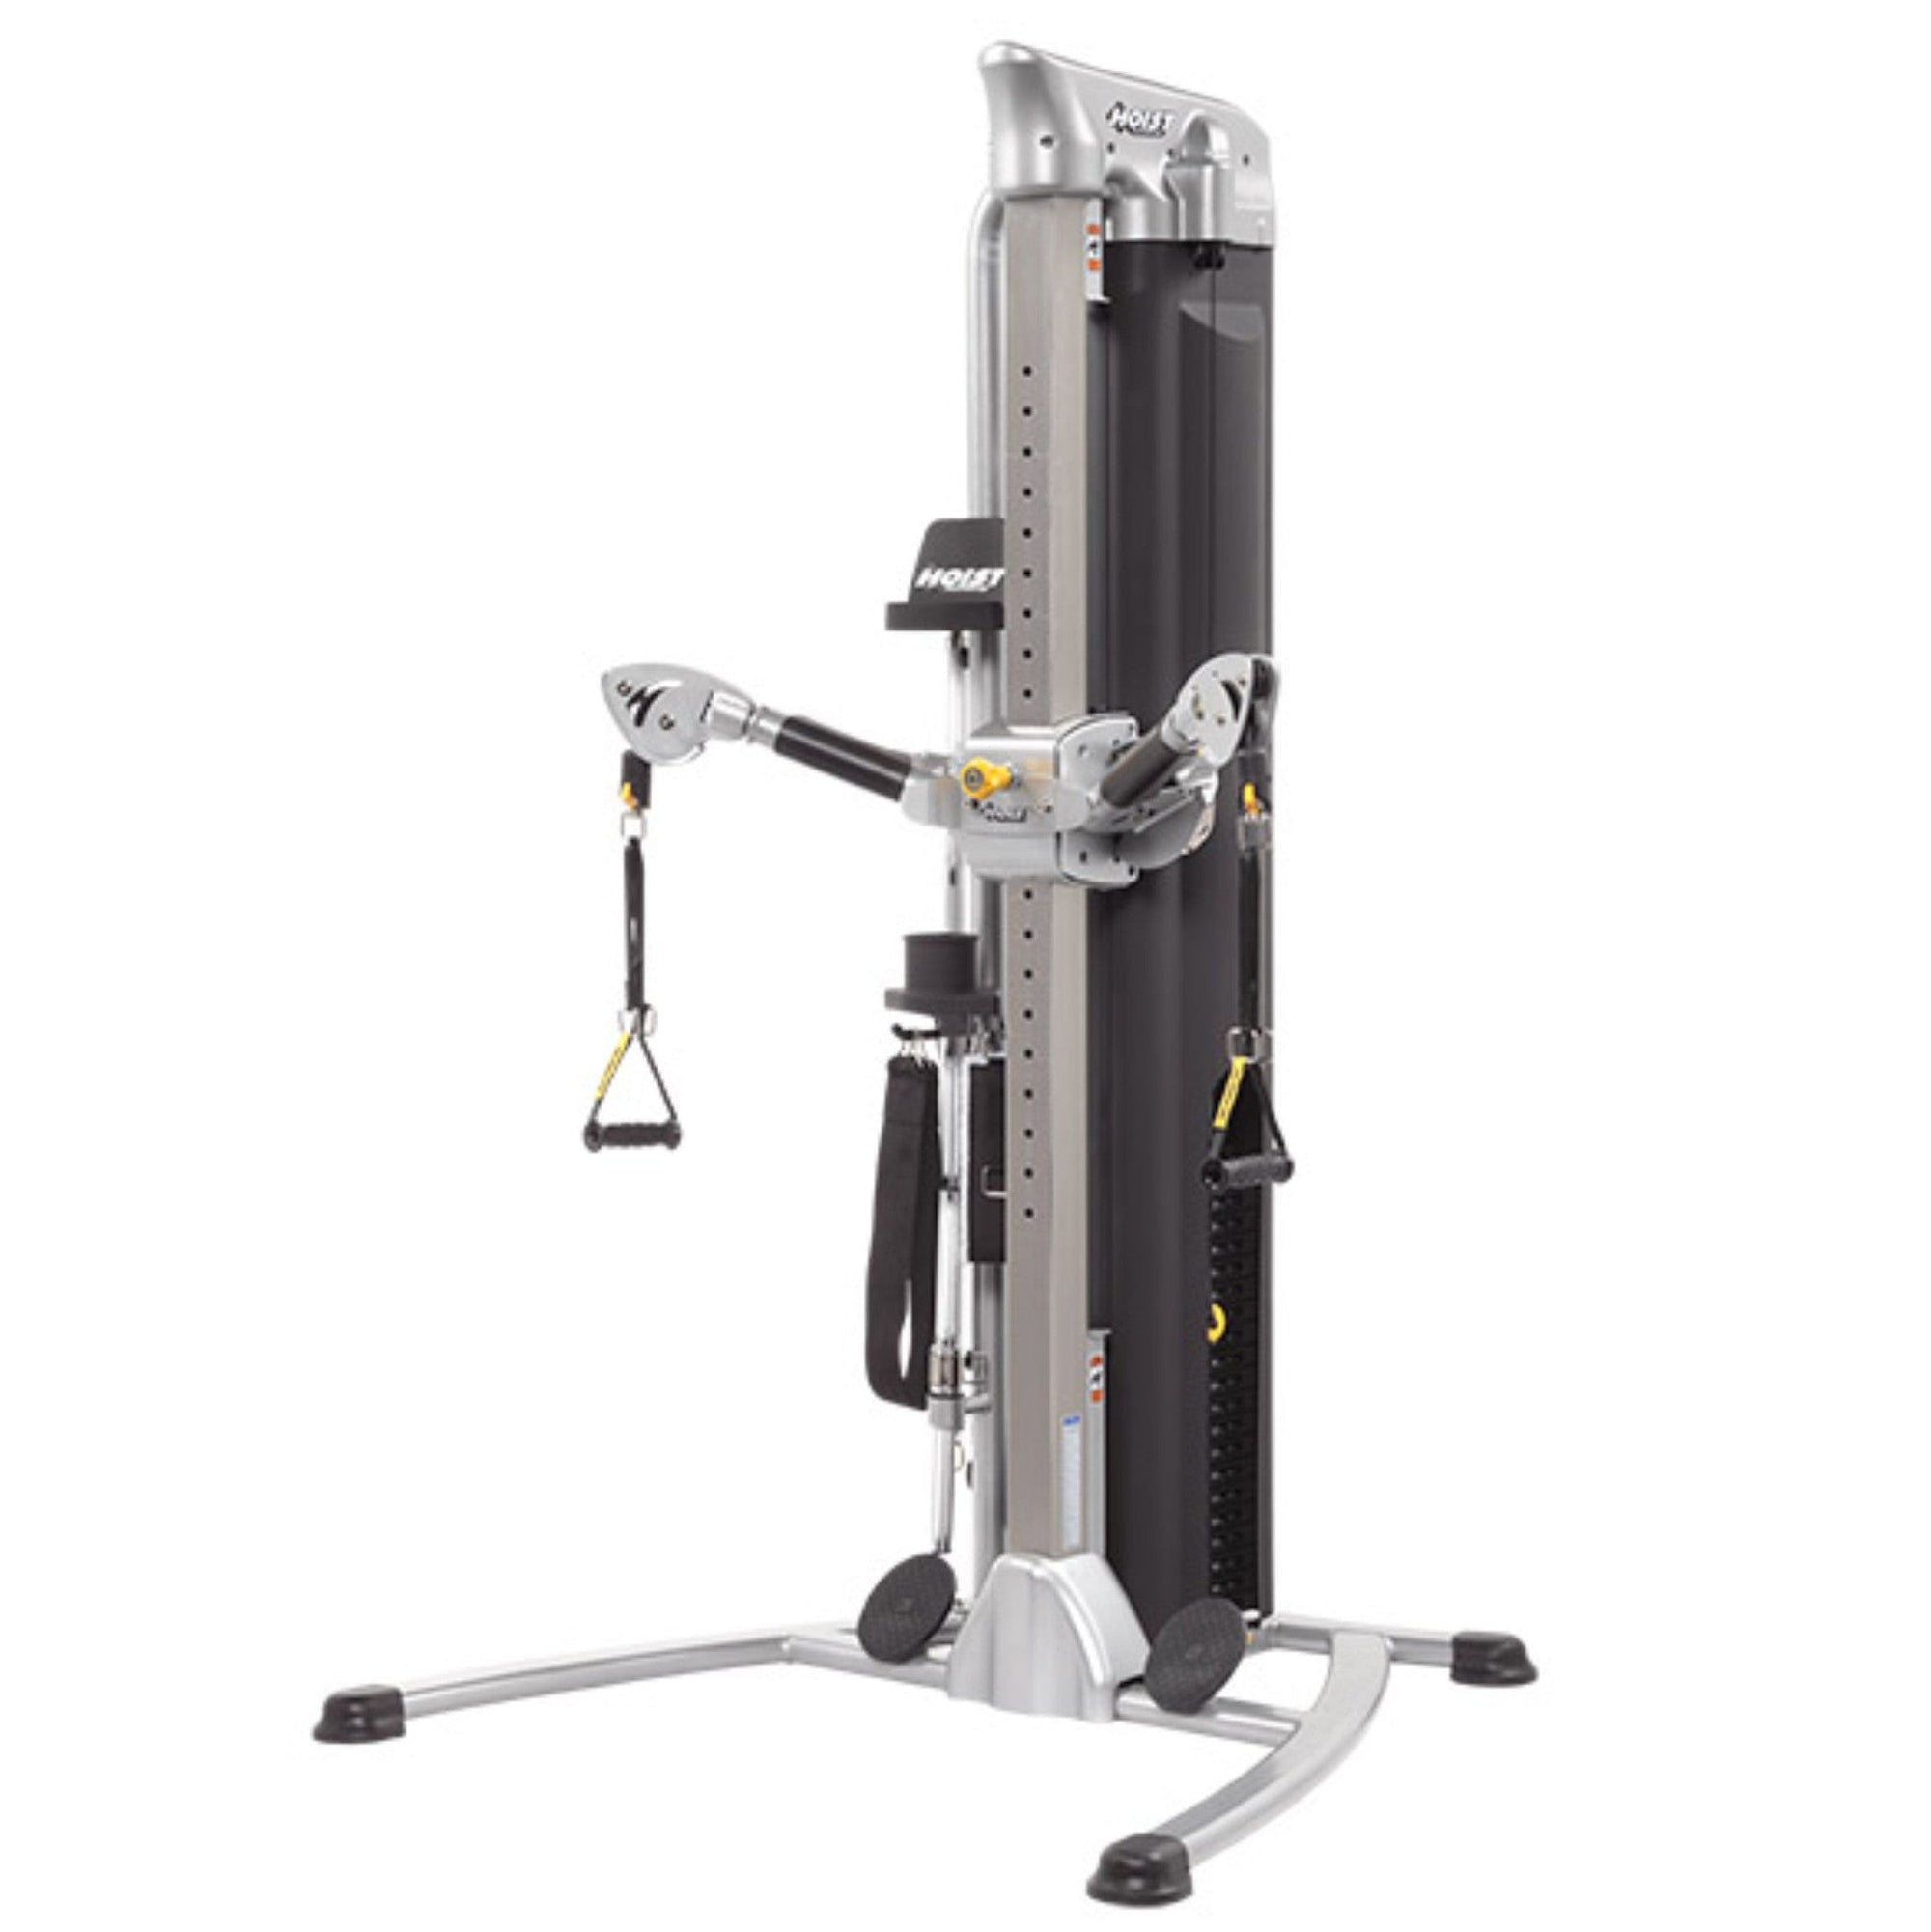 Hoist Fitness Mi5 Functional Trainer System full view | Fitness Experience